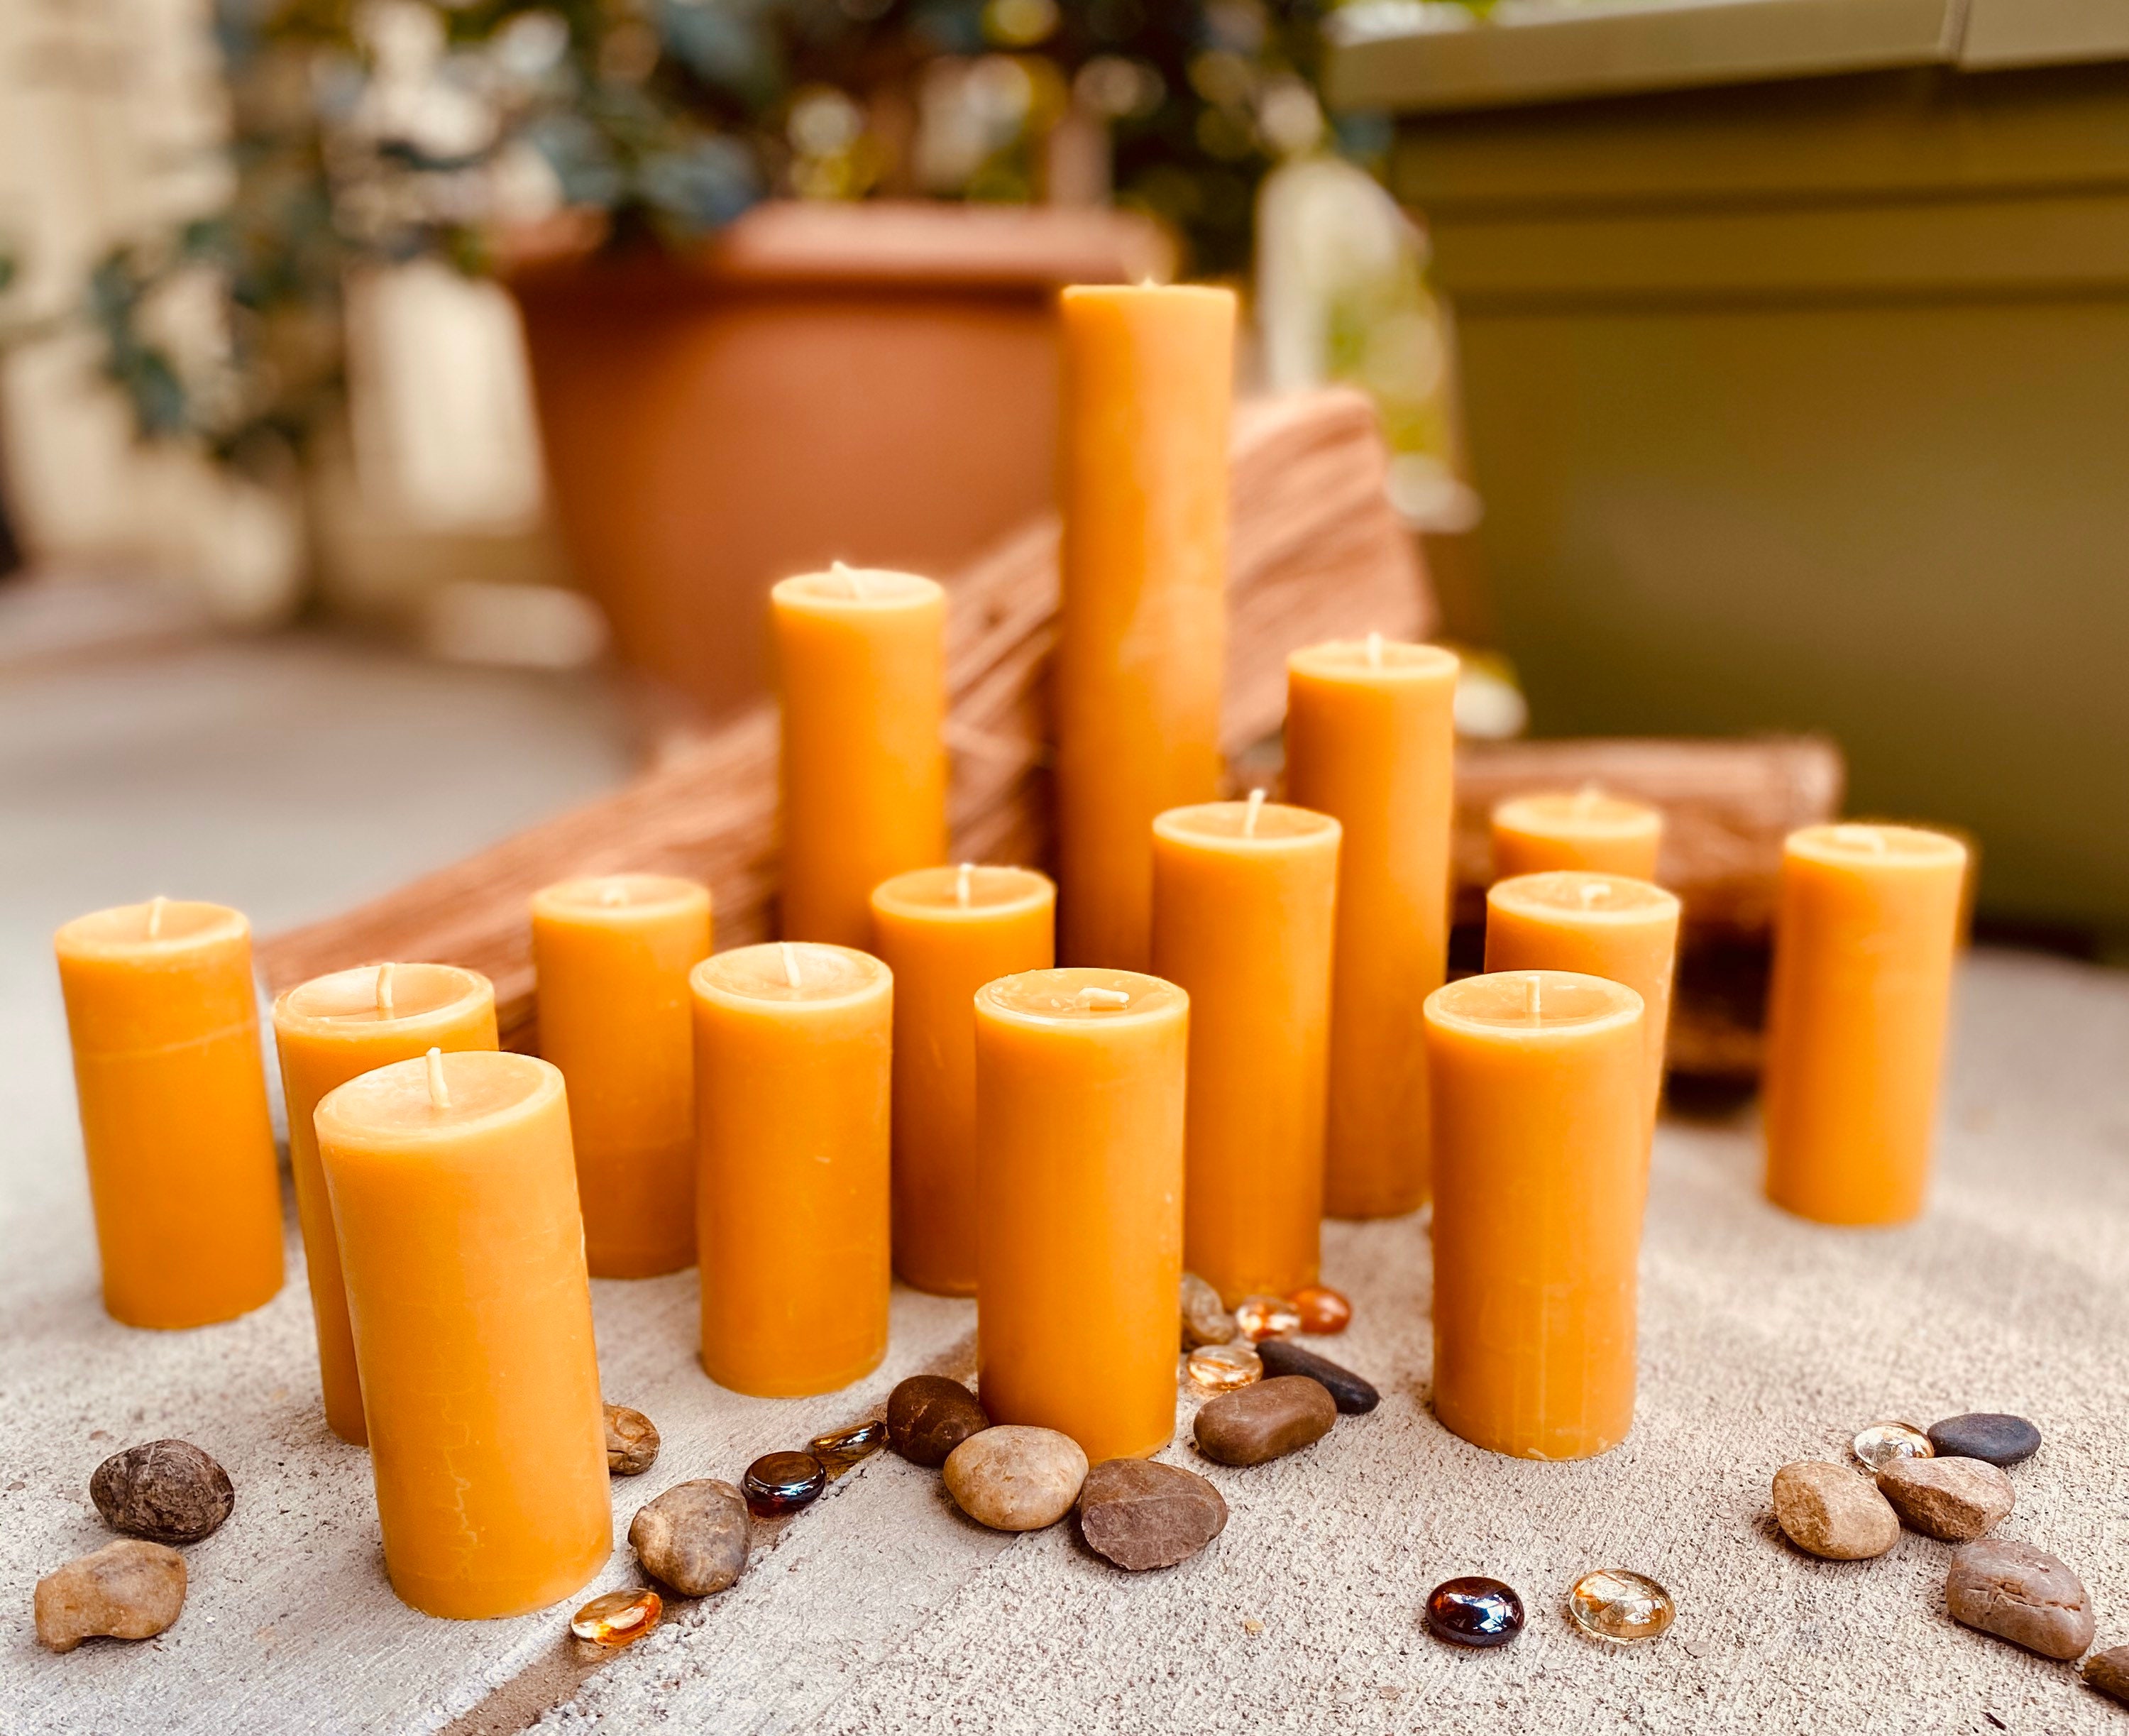 Beeswax100% Natural , Hand-poured Beeswax Candle, Enhanced With Dried  Orange Slice and Cinnamon Stick This is for ONE Beeswax Candle. 